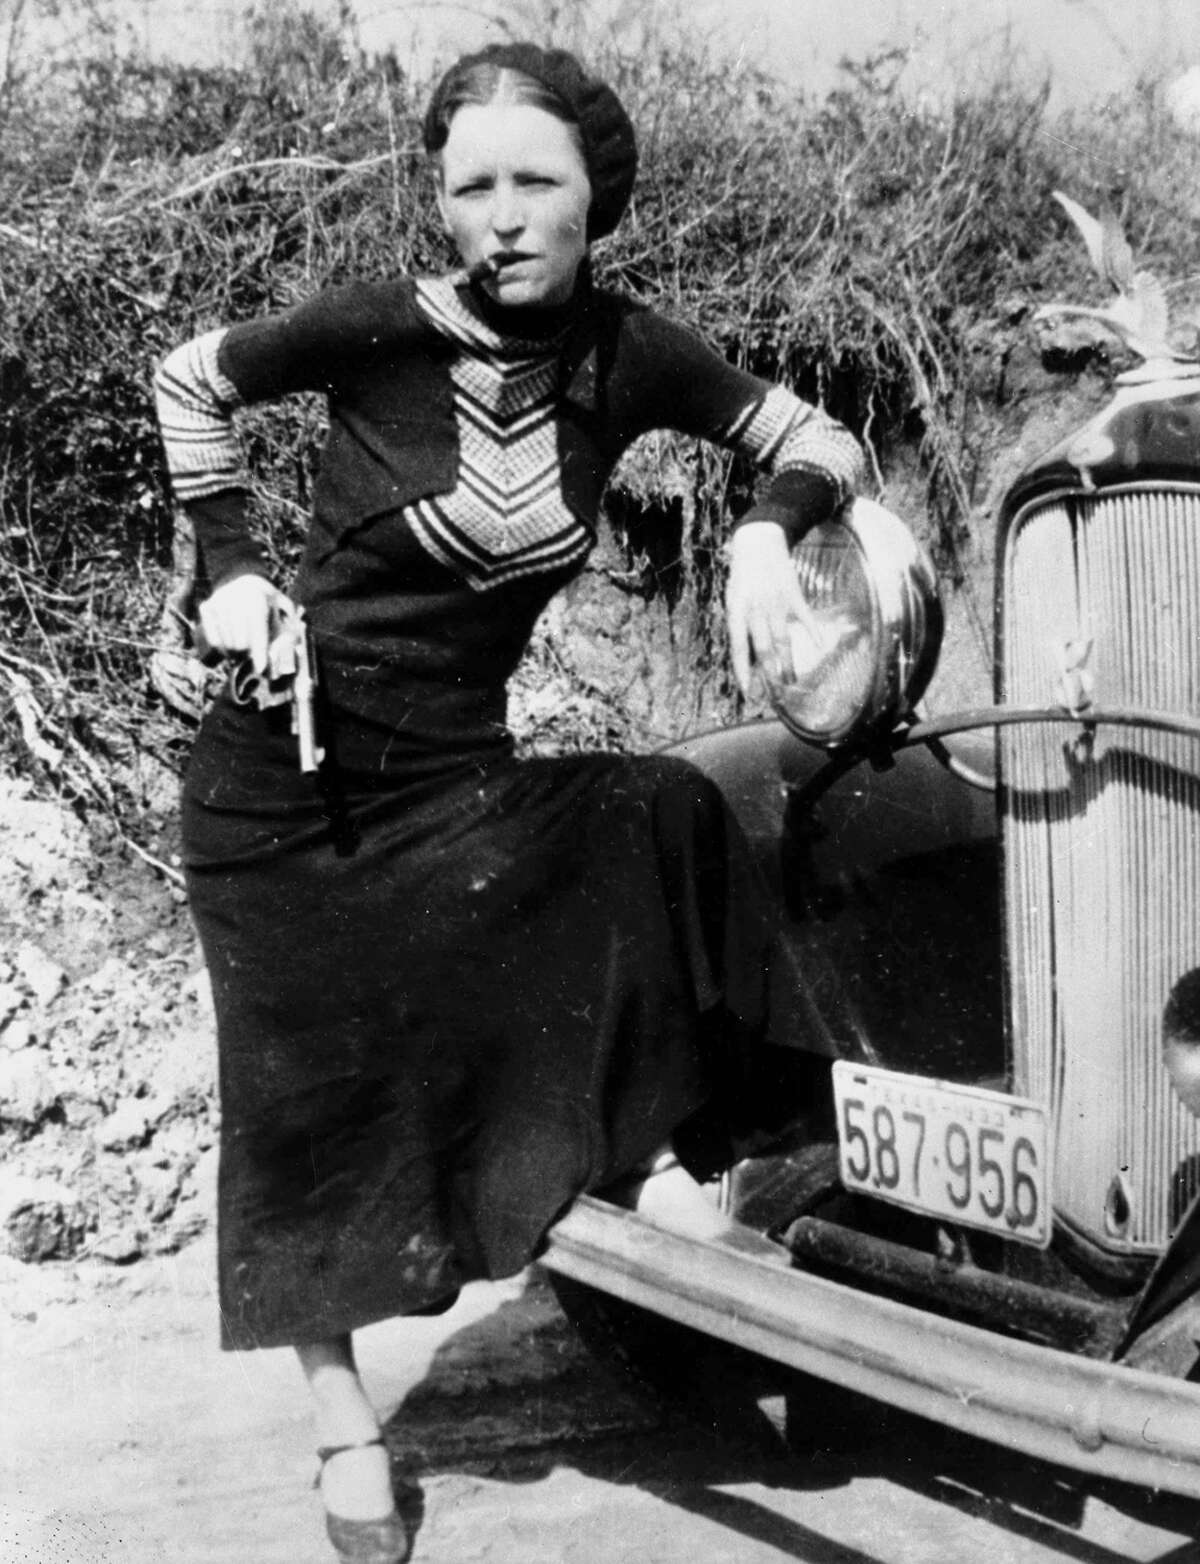 Bonnie Parker poses with a cigar and gun in a photo made infamous by the press, circa 1932.